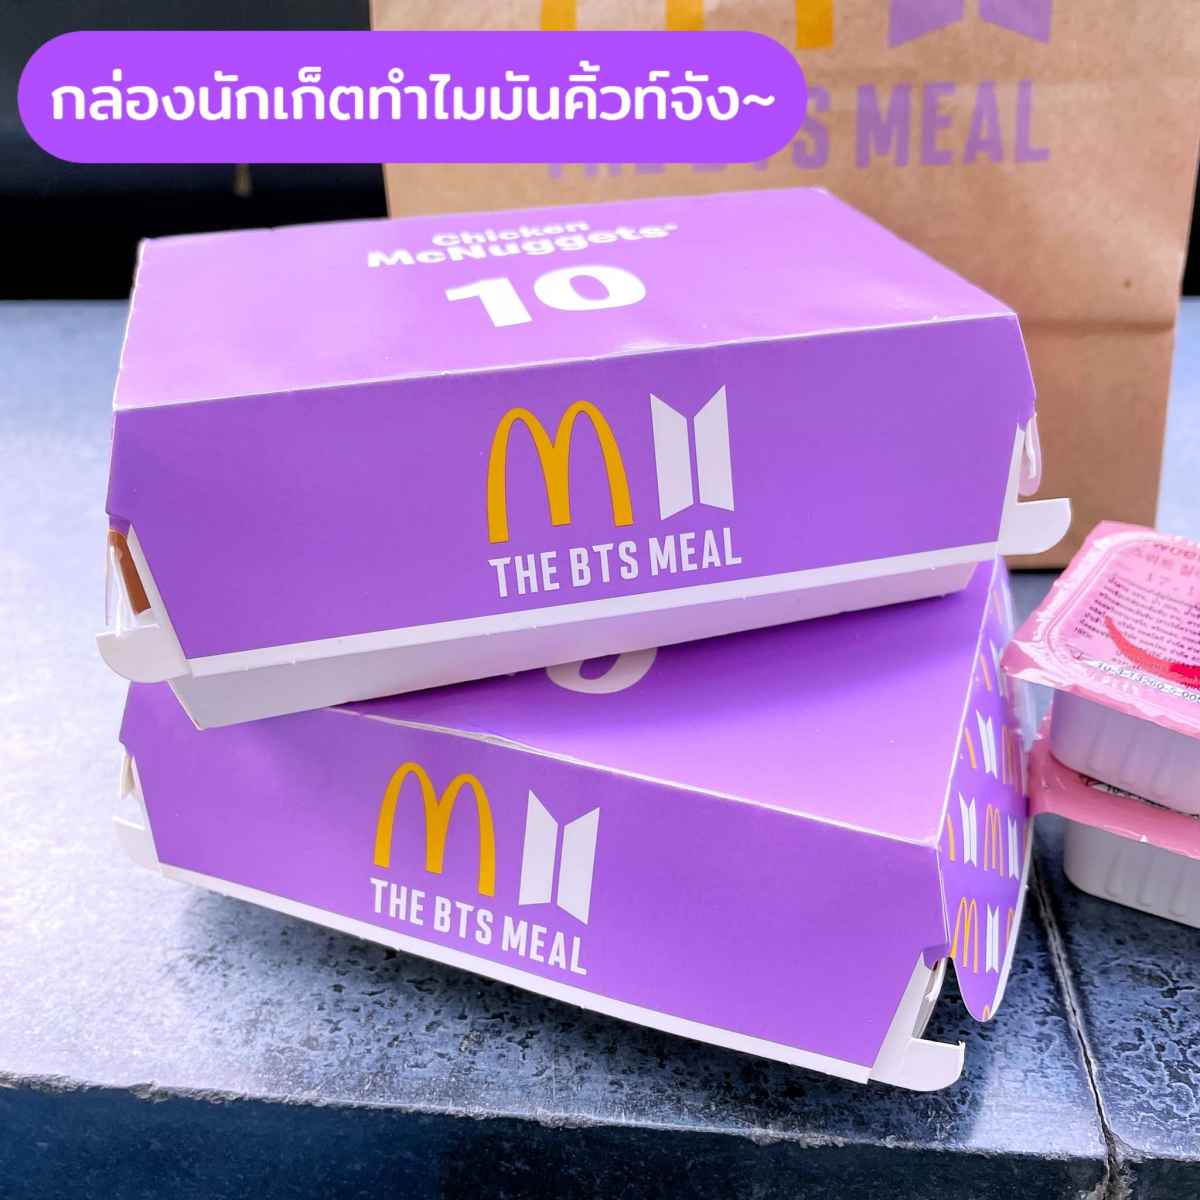 The BTS Meal